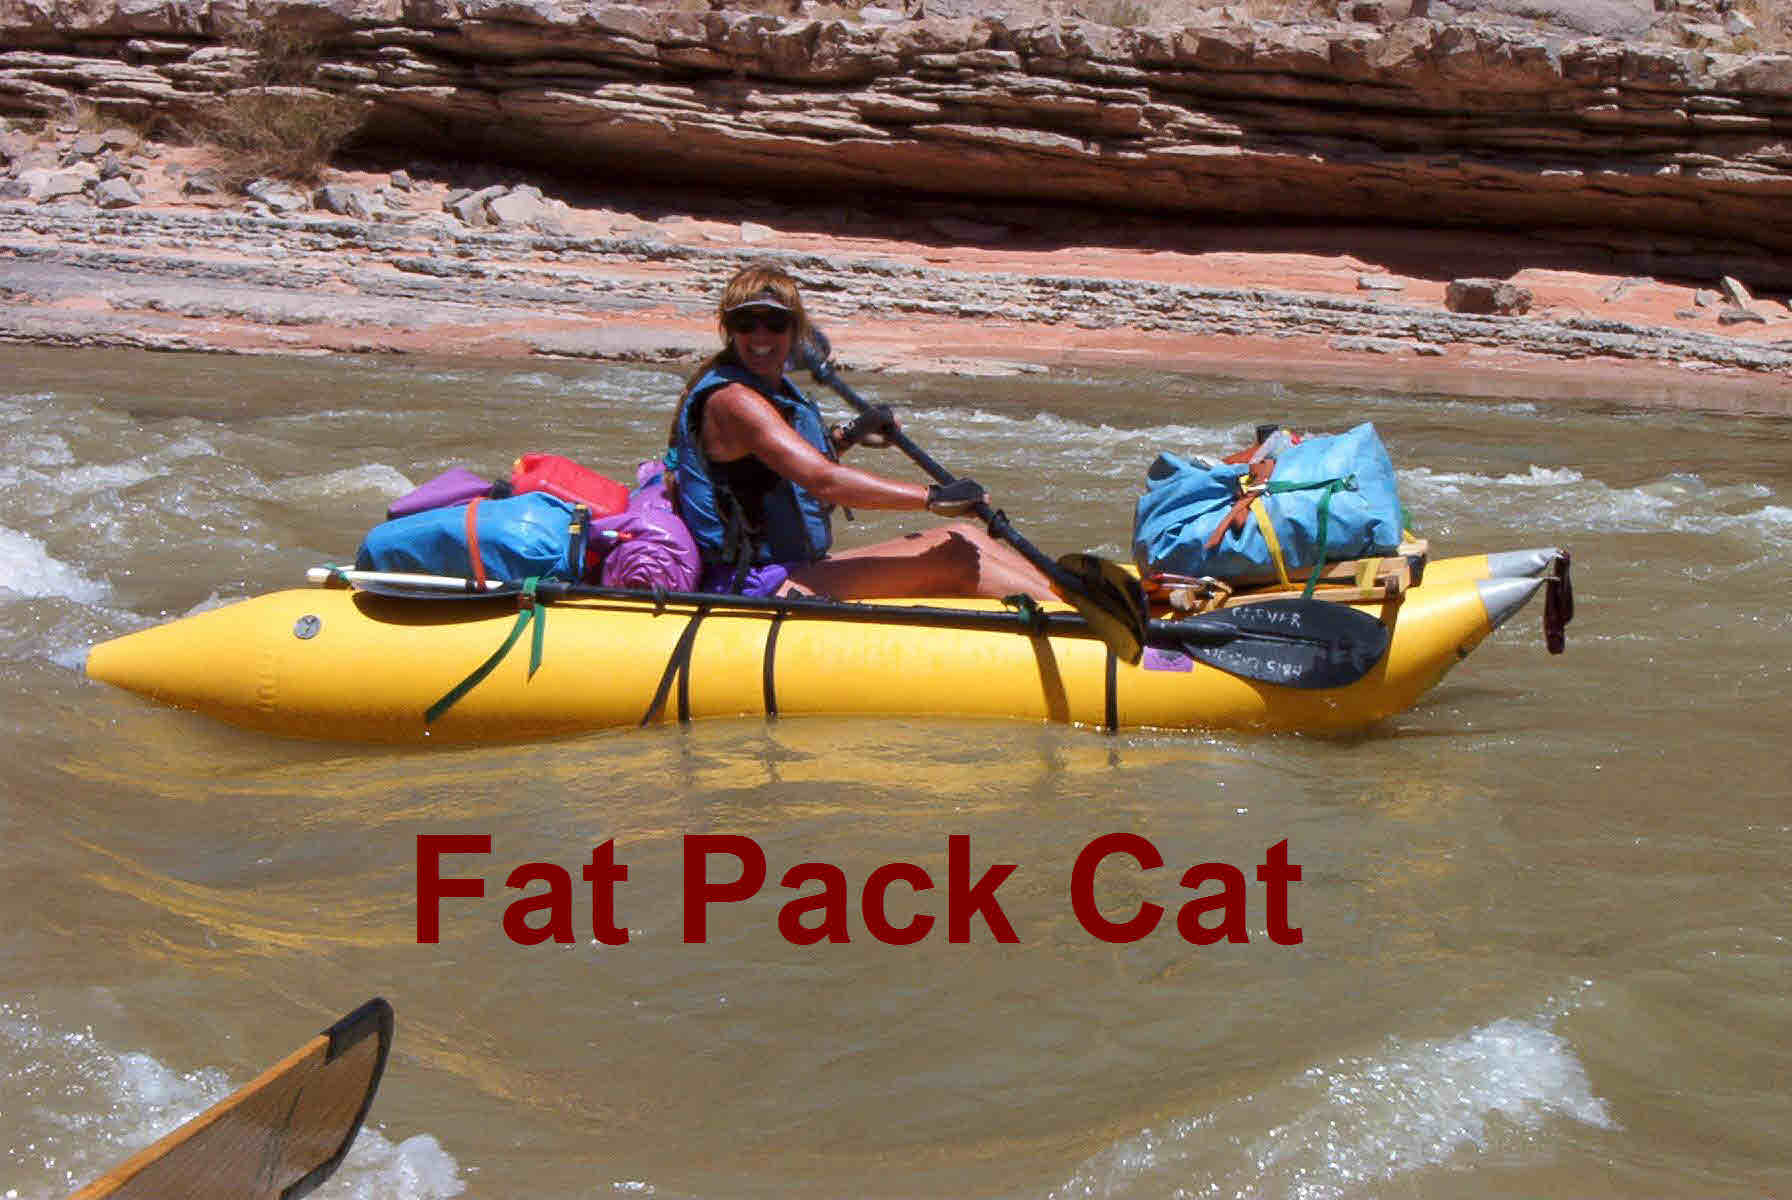 Inflatable boats, personal expedition paddle catarafts